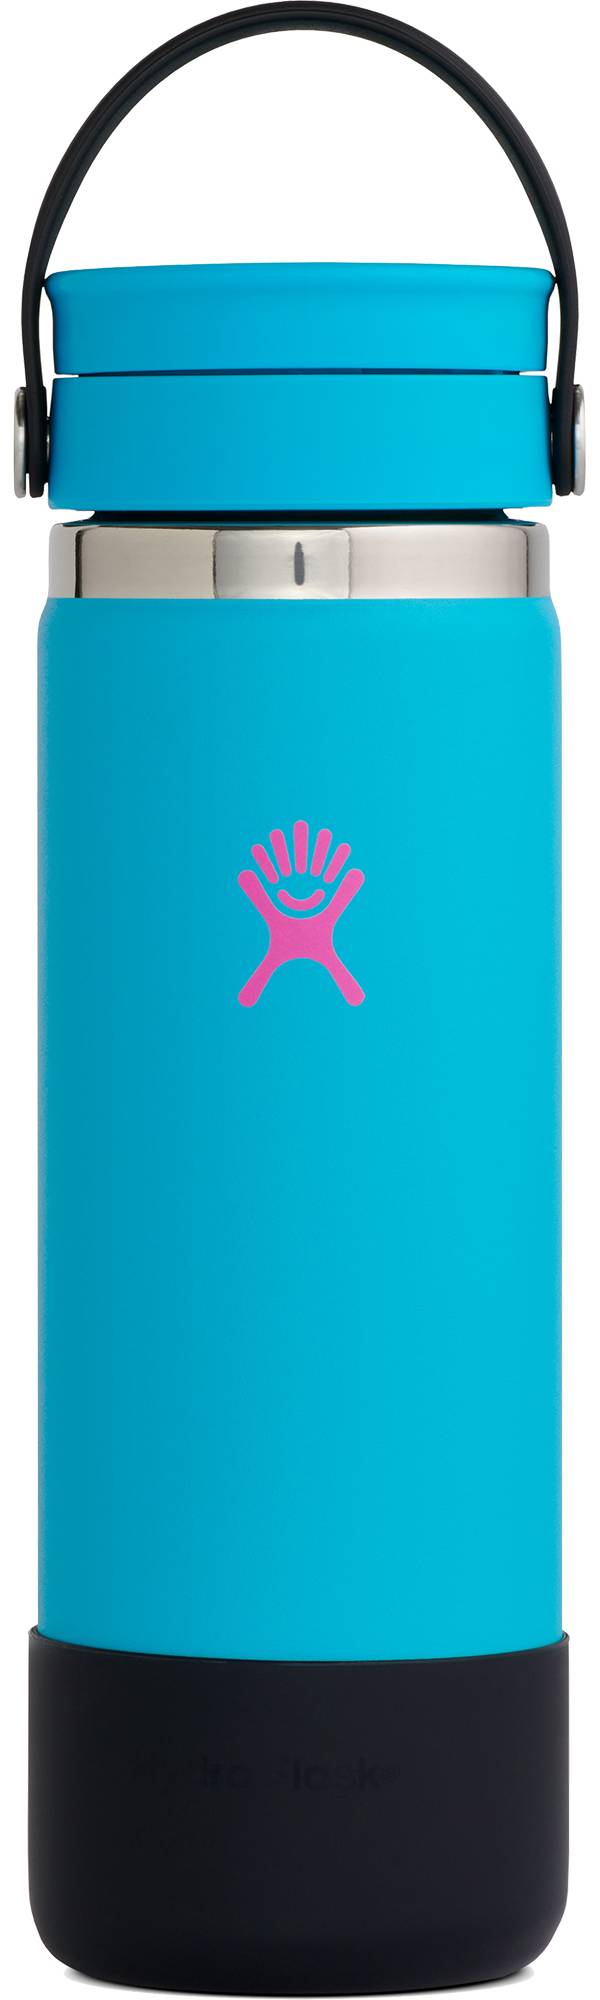 Hydro Flask Elevate Series 20 oz. Wide Mouth Flex Sip Bottle product image